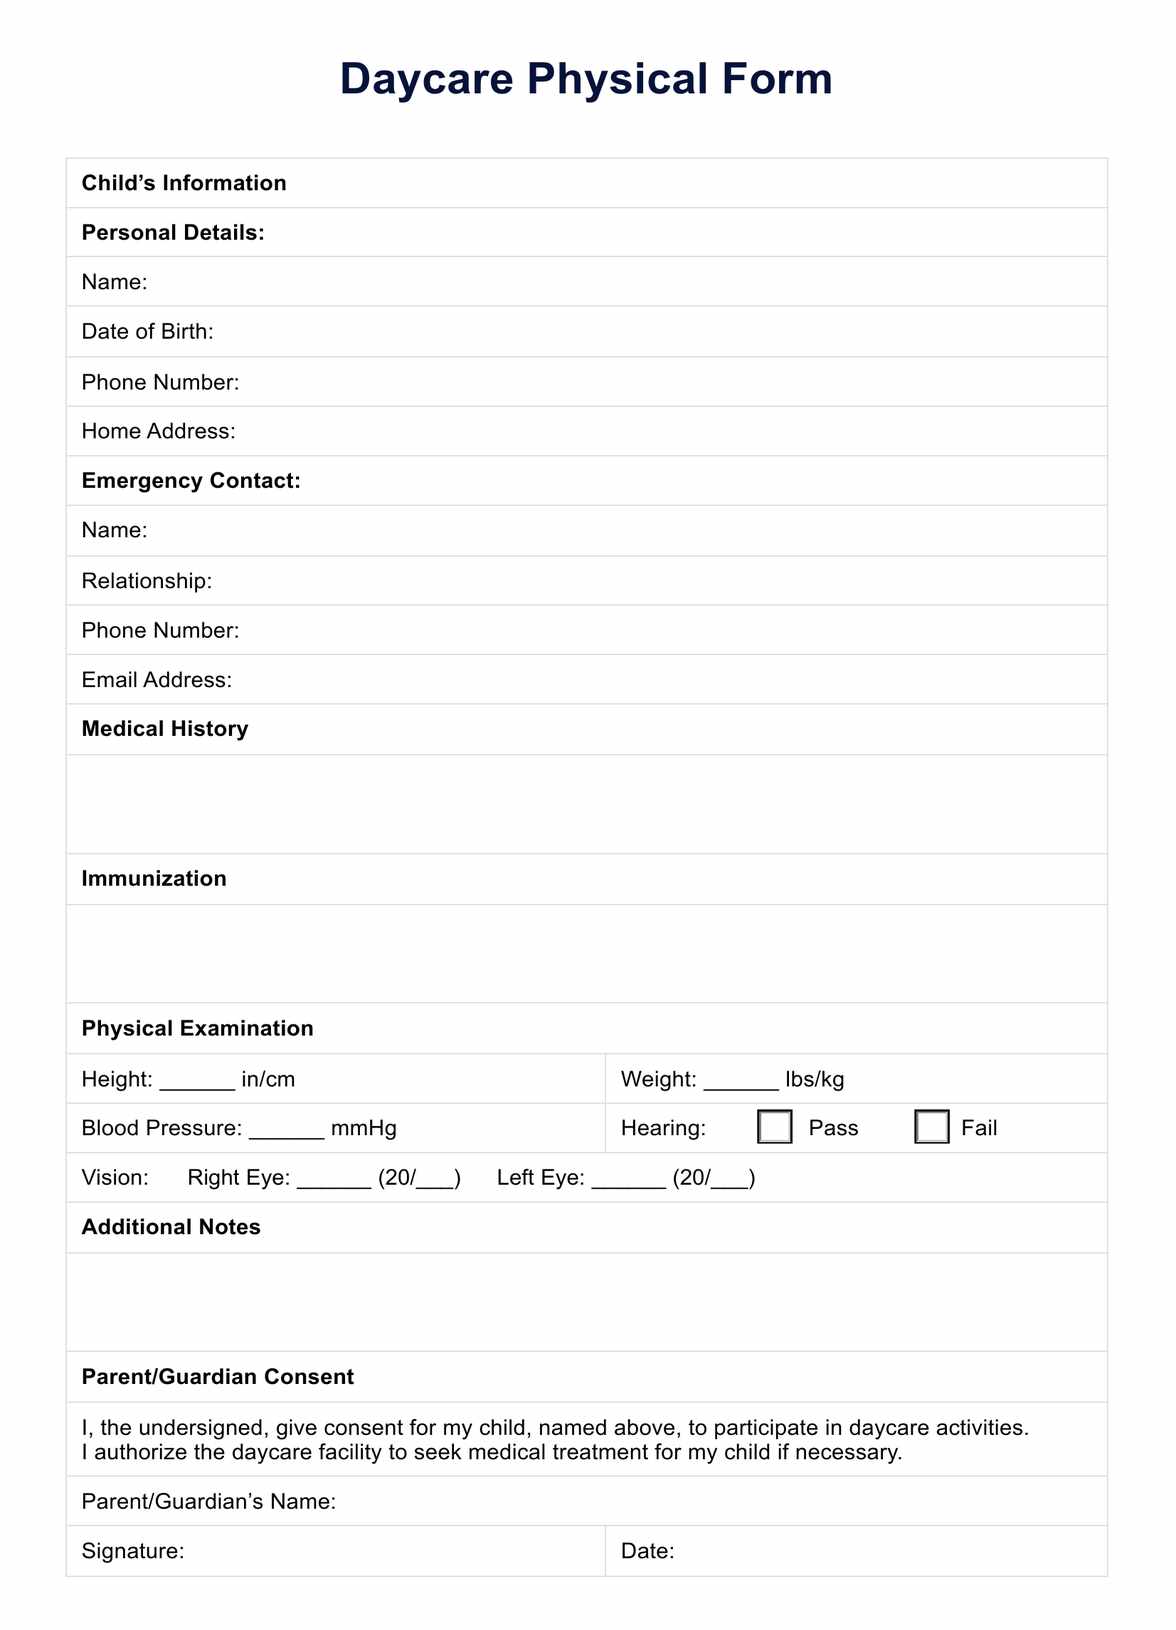 Daycare Physical Form PDF Example